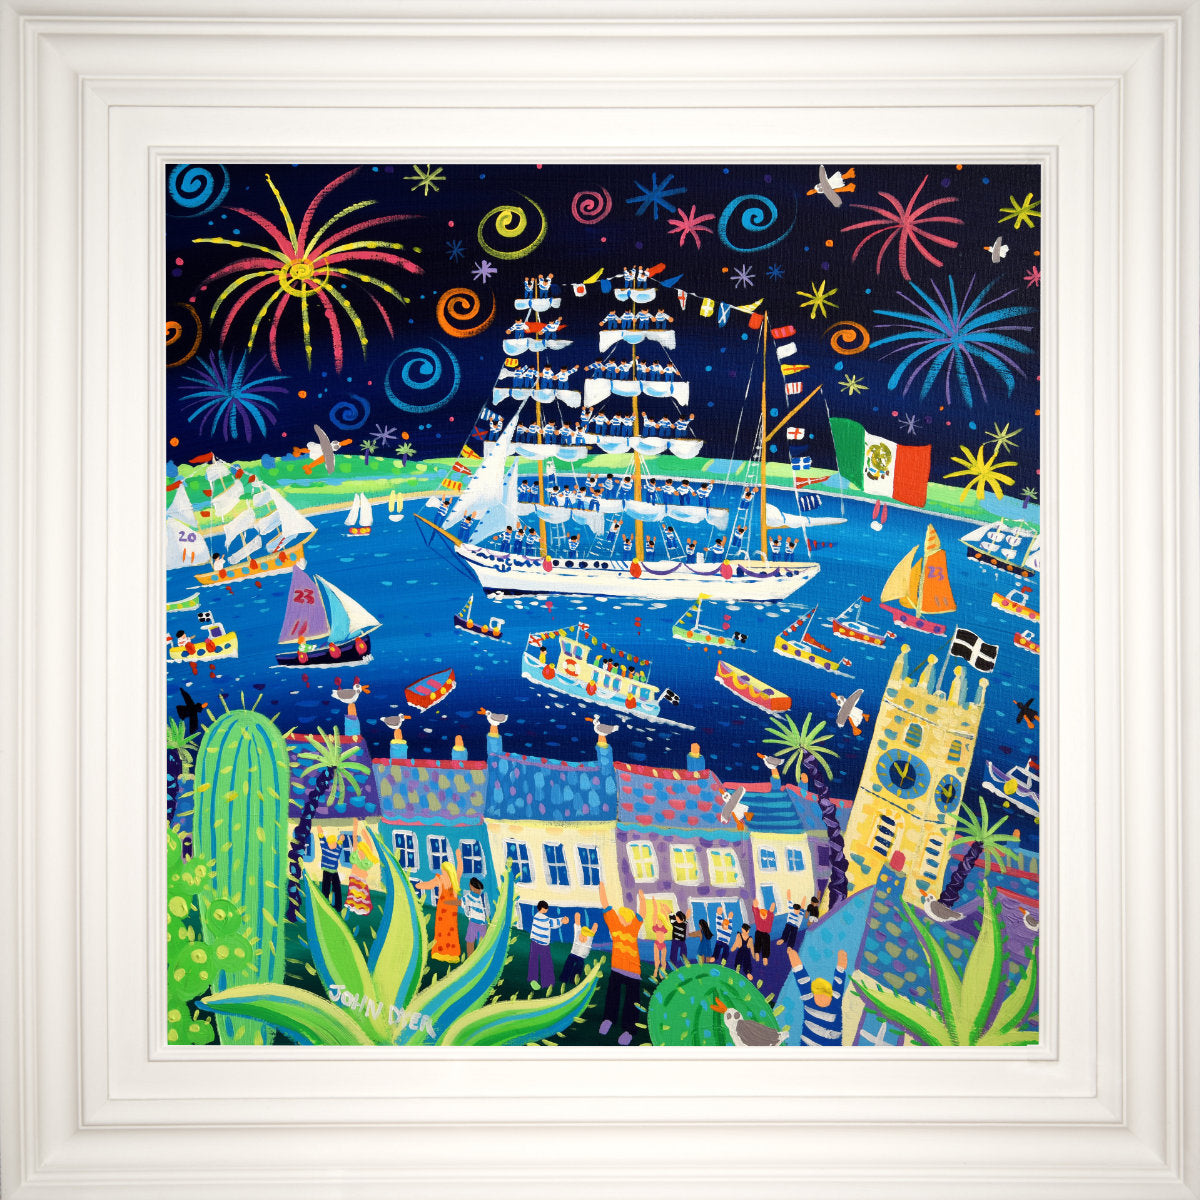 &#39;Cuauhtémoc Mexican Nights, Falmouth Tall Ships 2023&#39;, 24x24 inches acrylic on canvas. Cornwall Painting by Cornish Artist John Dyer. Cornish Art from our Cornwall Art Gallery